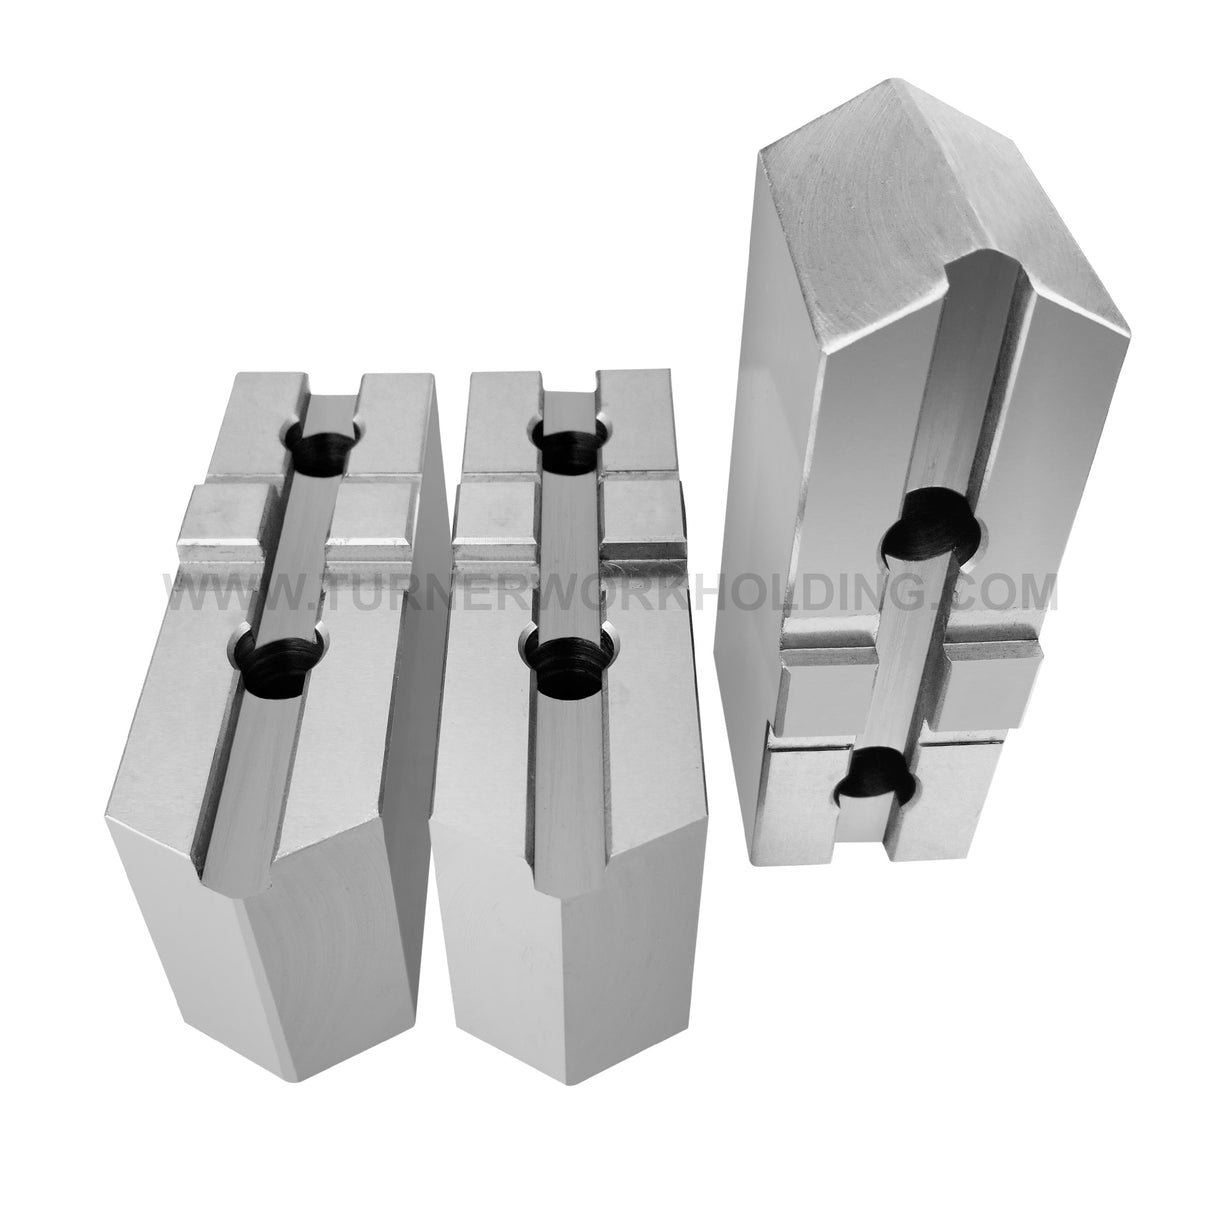 TG-10C-2.0-SP - AMERICAN STANDARD STEEL SOFT JAWS FOR TONGUE & GROOVE 10" CHUCK 2" HT (3 PC SET)